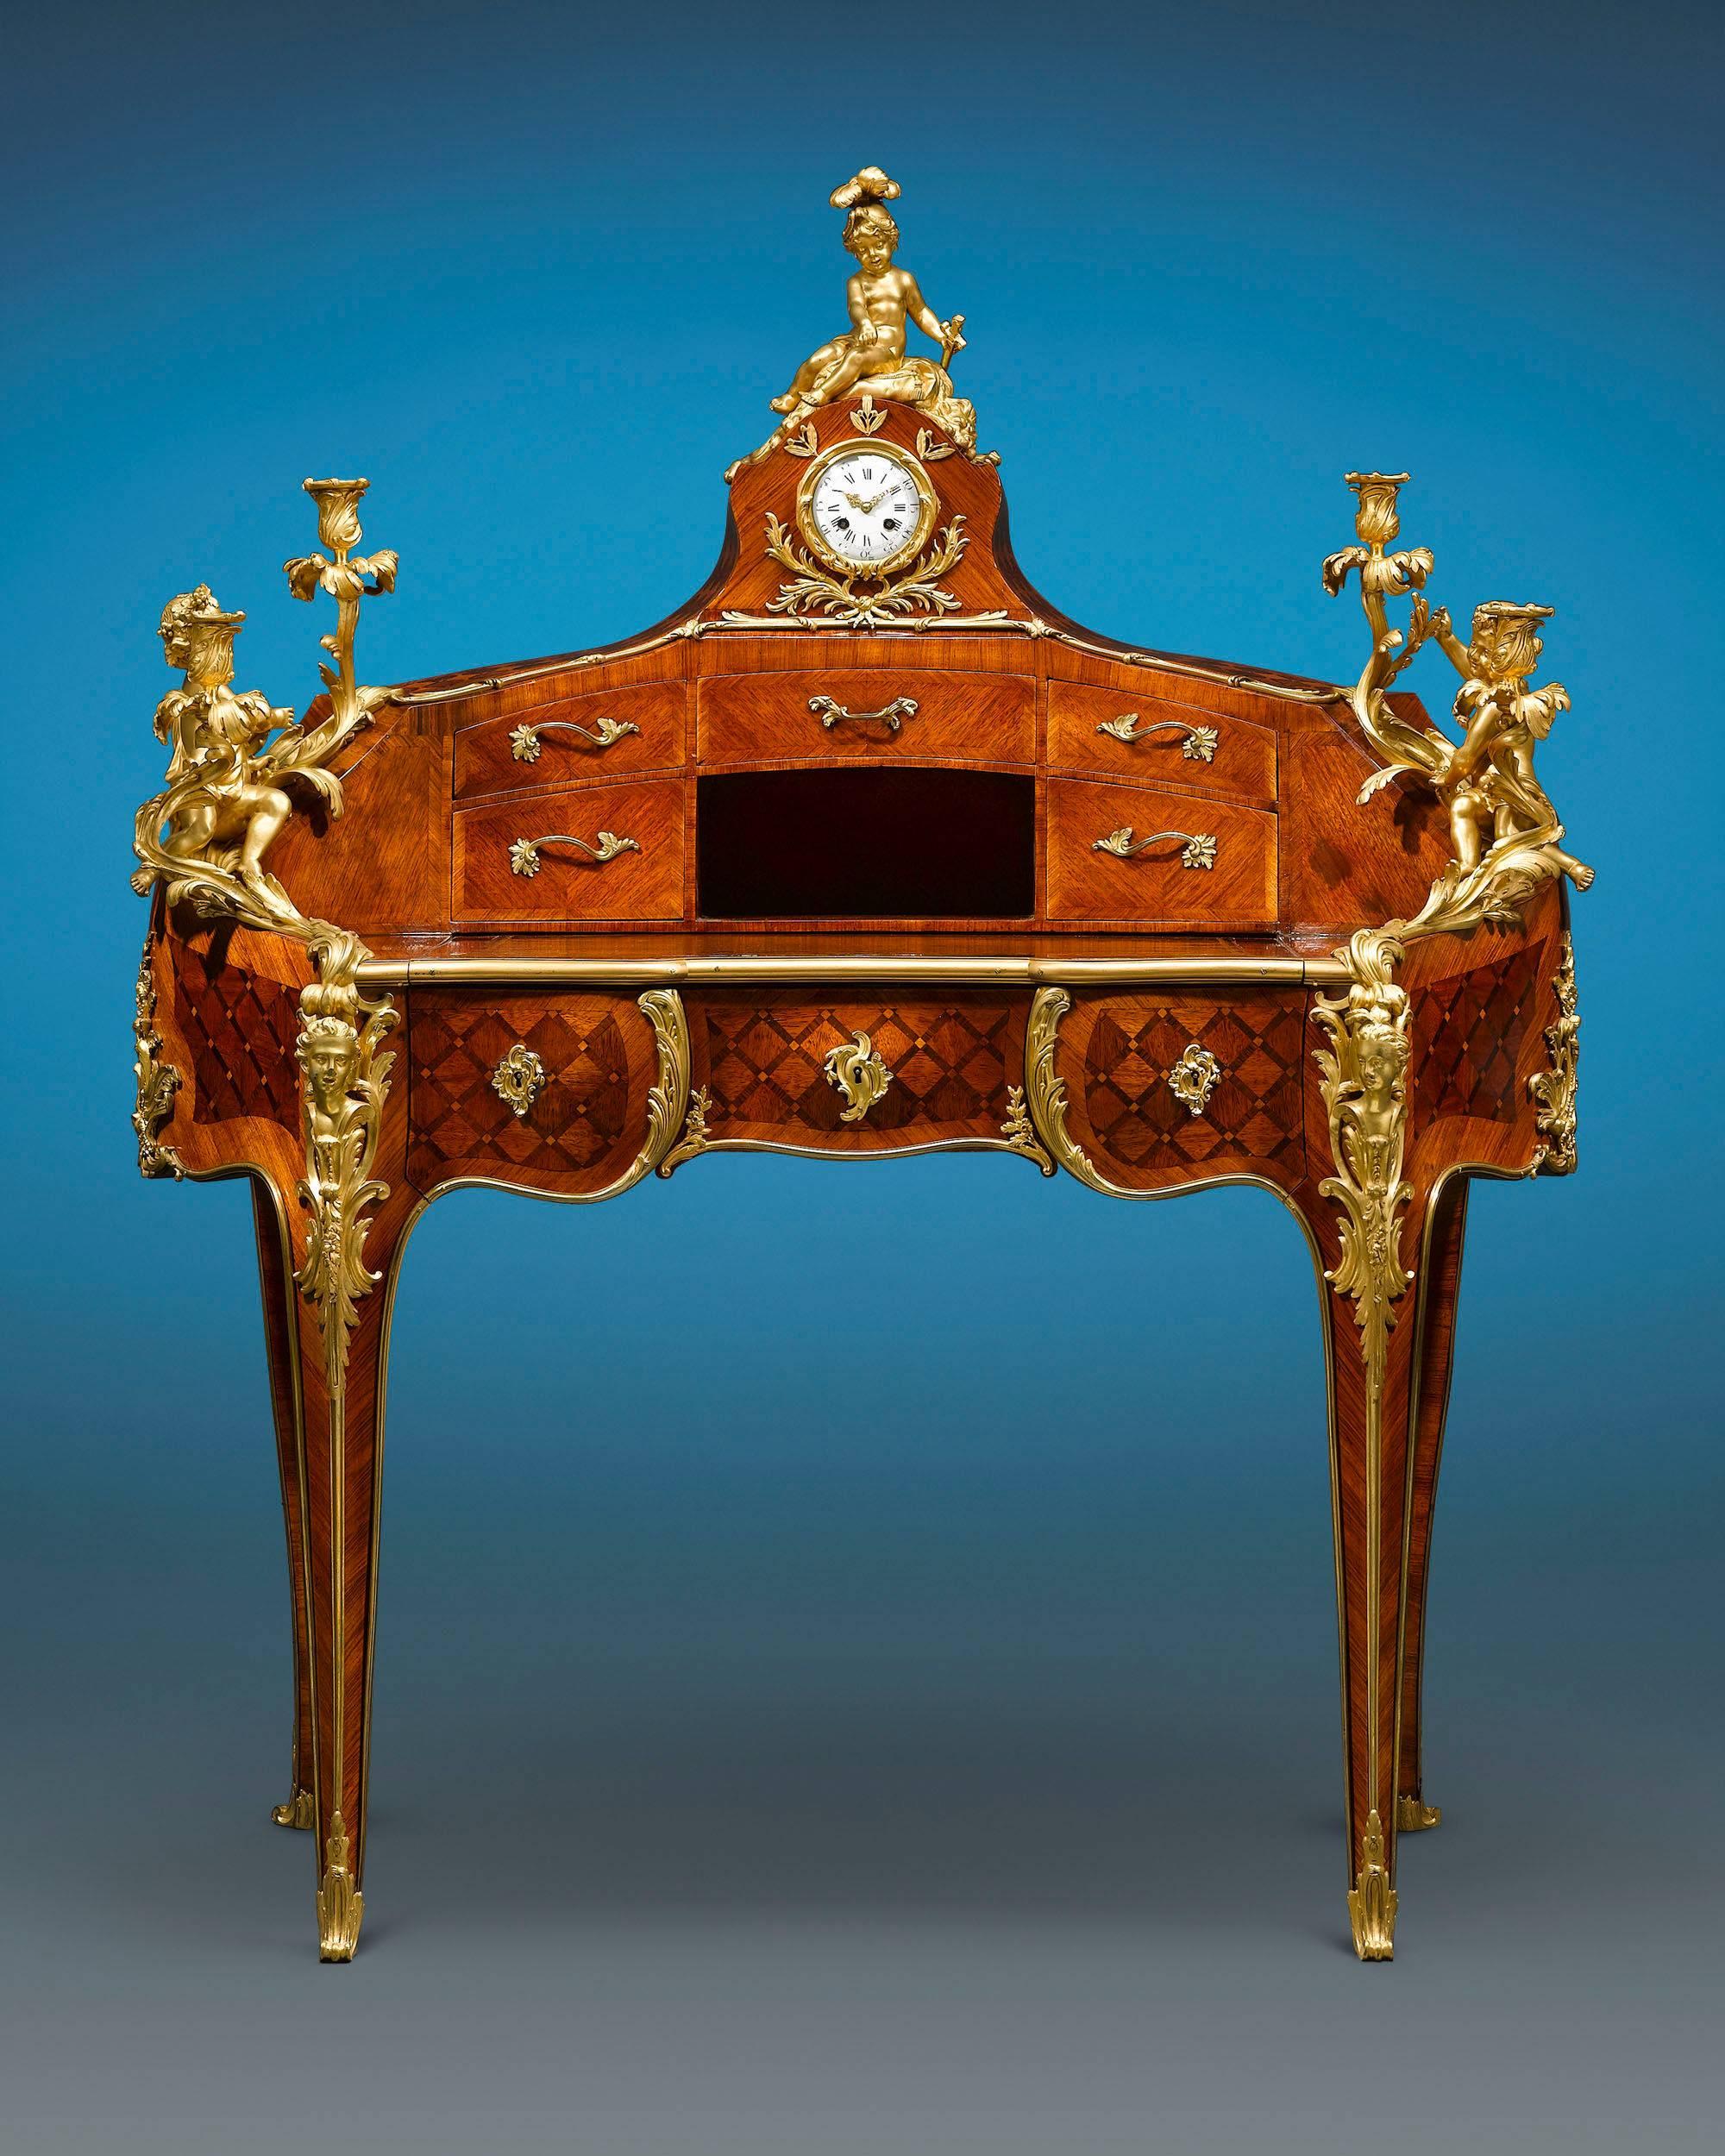 This fabulous and rare bureau à gradin, or tiered desk, was crafted by the highly respected ébéniste Theodore Millet of Paris, founder of the acclaimed Maison Millet firm. Displaying an outstanding rognon, or kidney shape, the desk is decorated